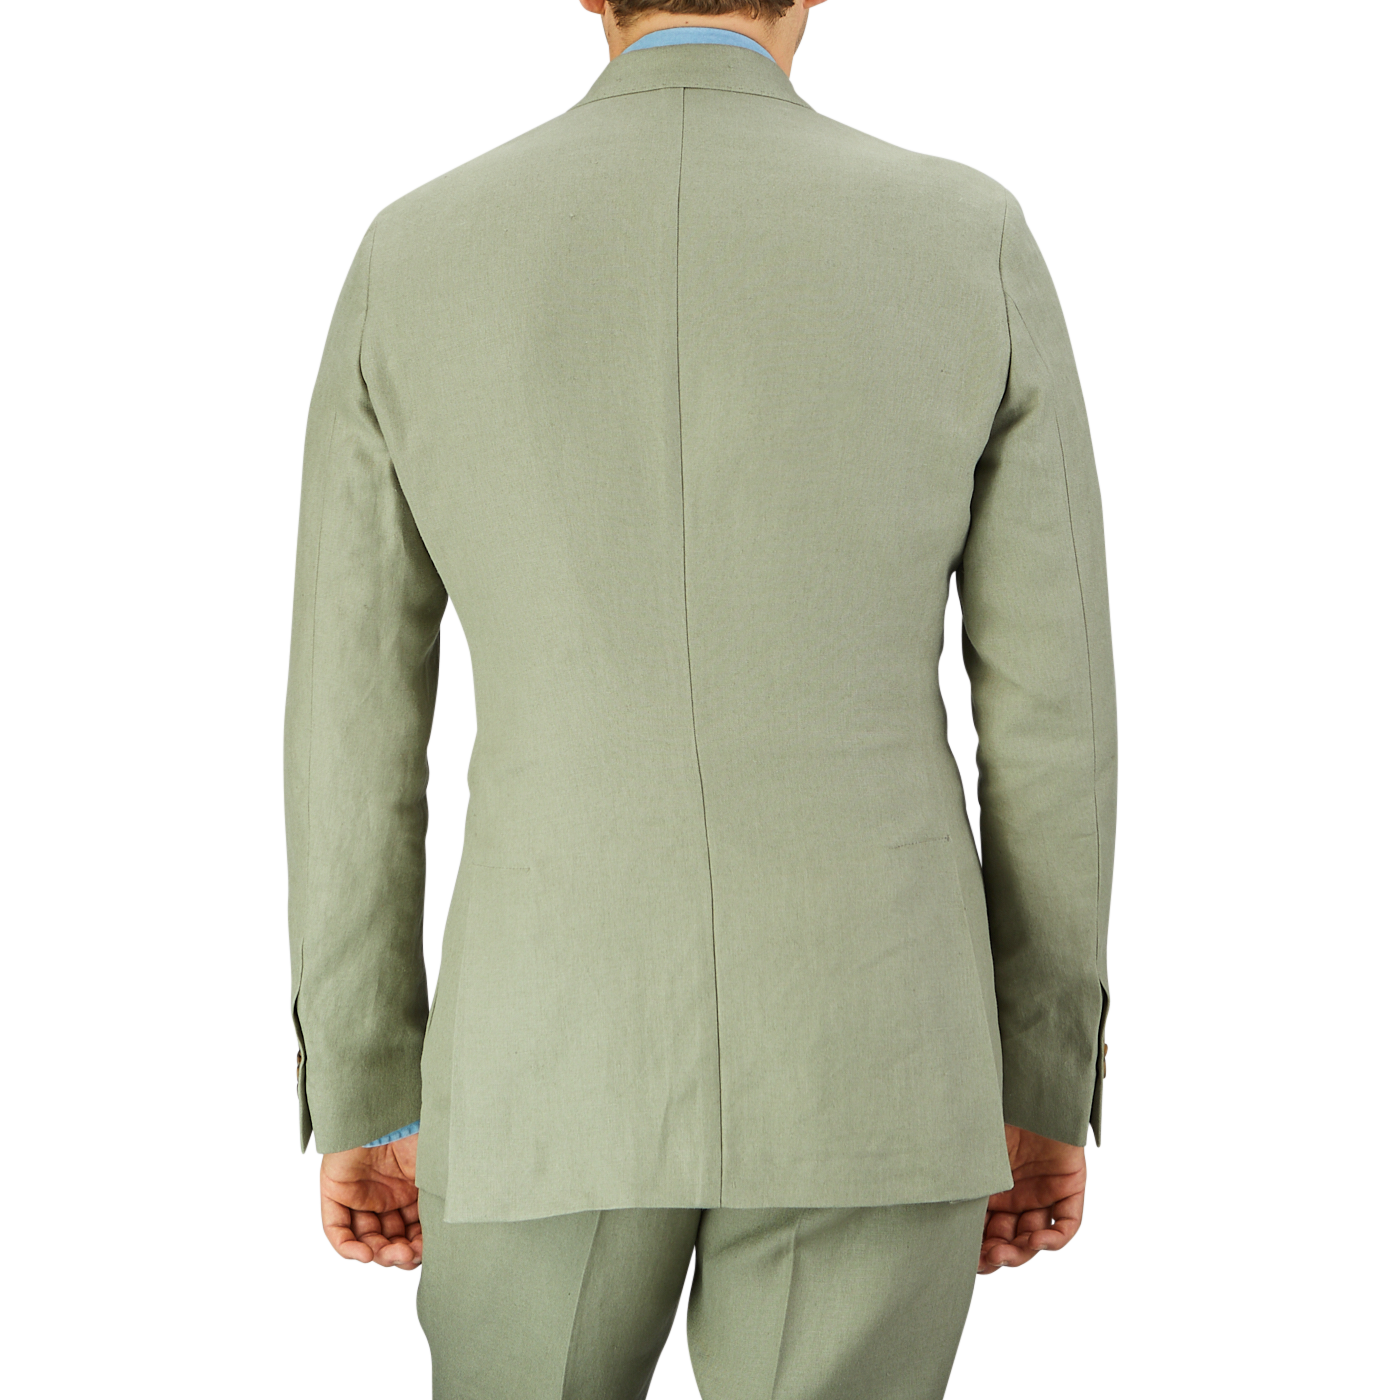 Person in a Sage Green Canapa Hemp DB Suit crafted from Studio 73's canapa hemp linen, viewed from the back.